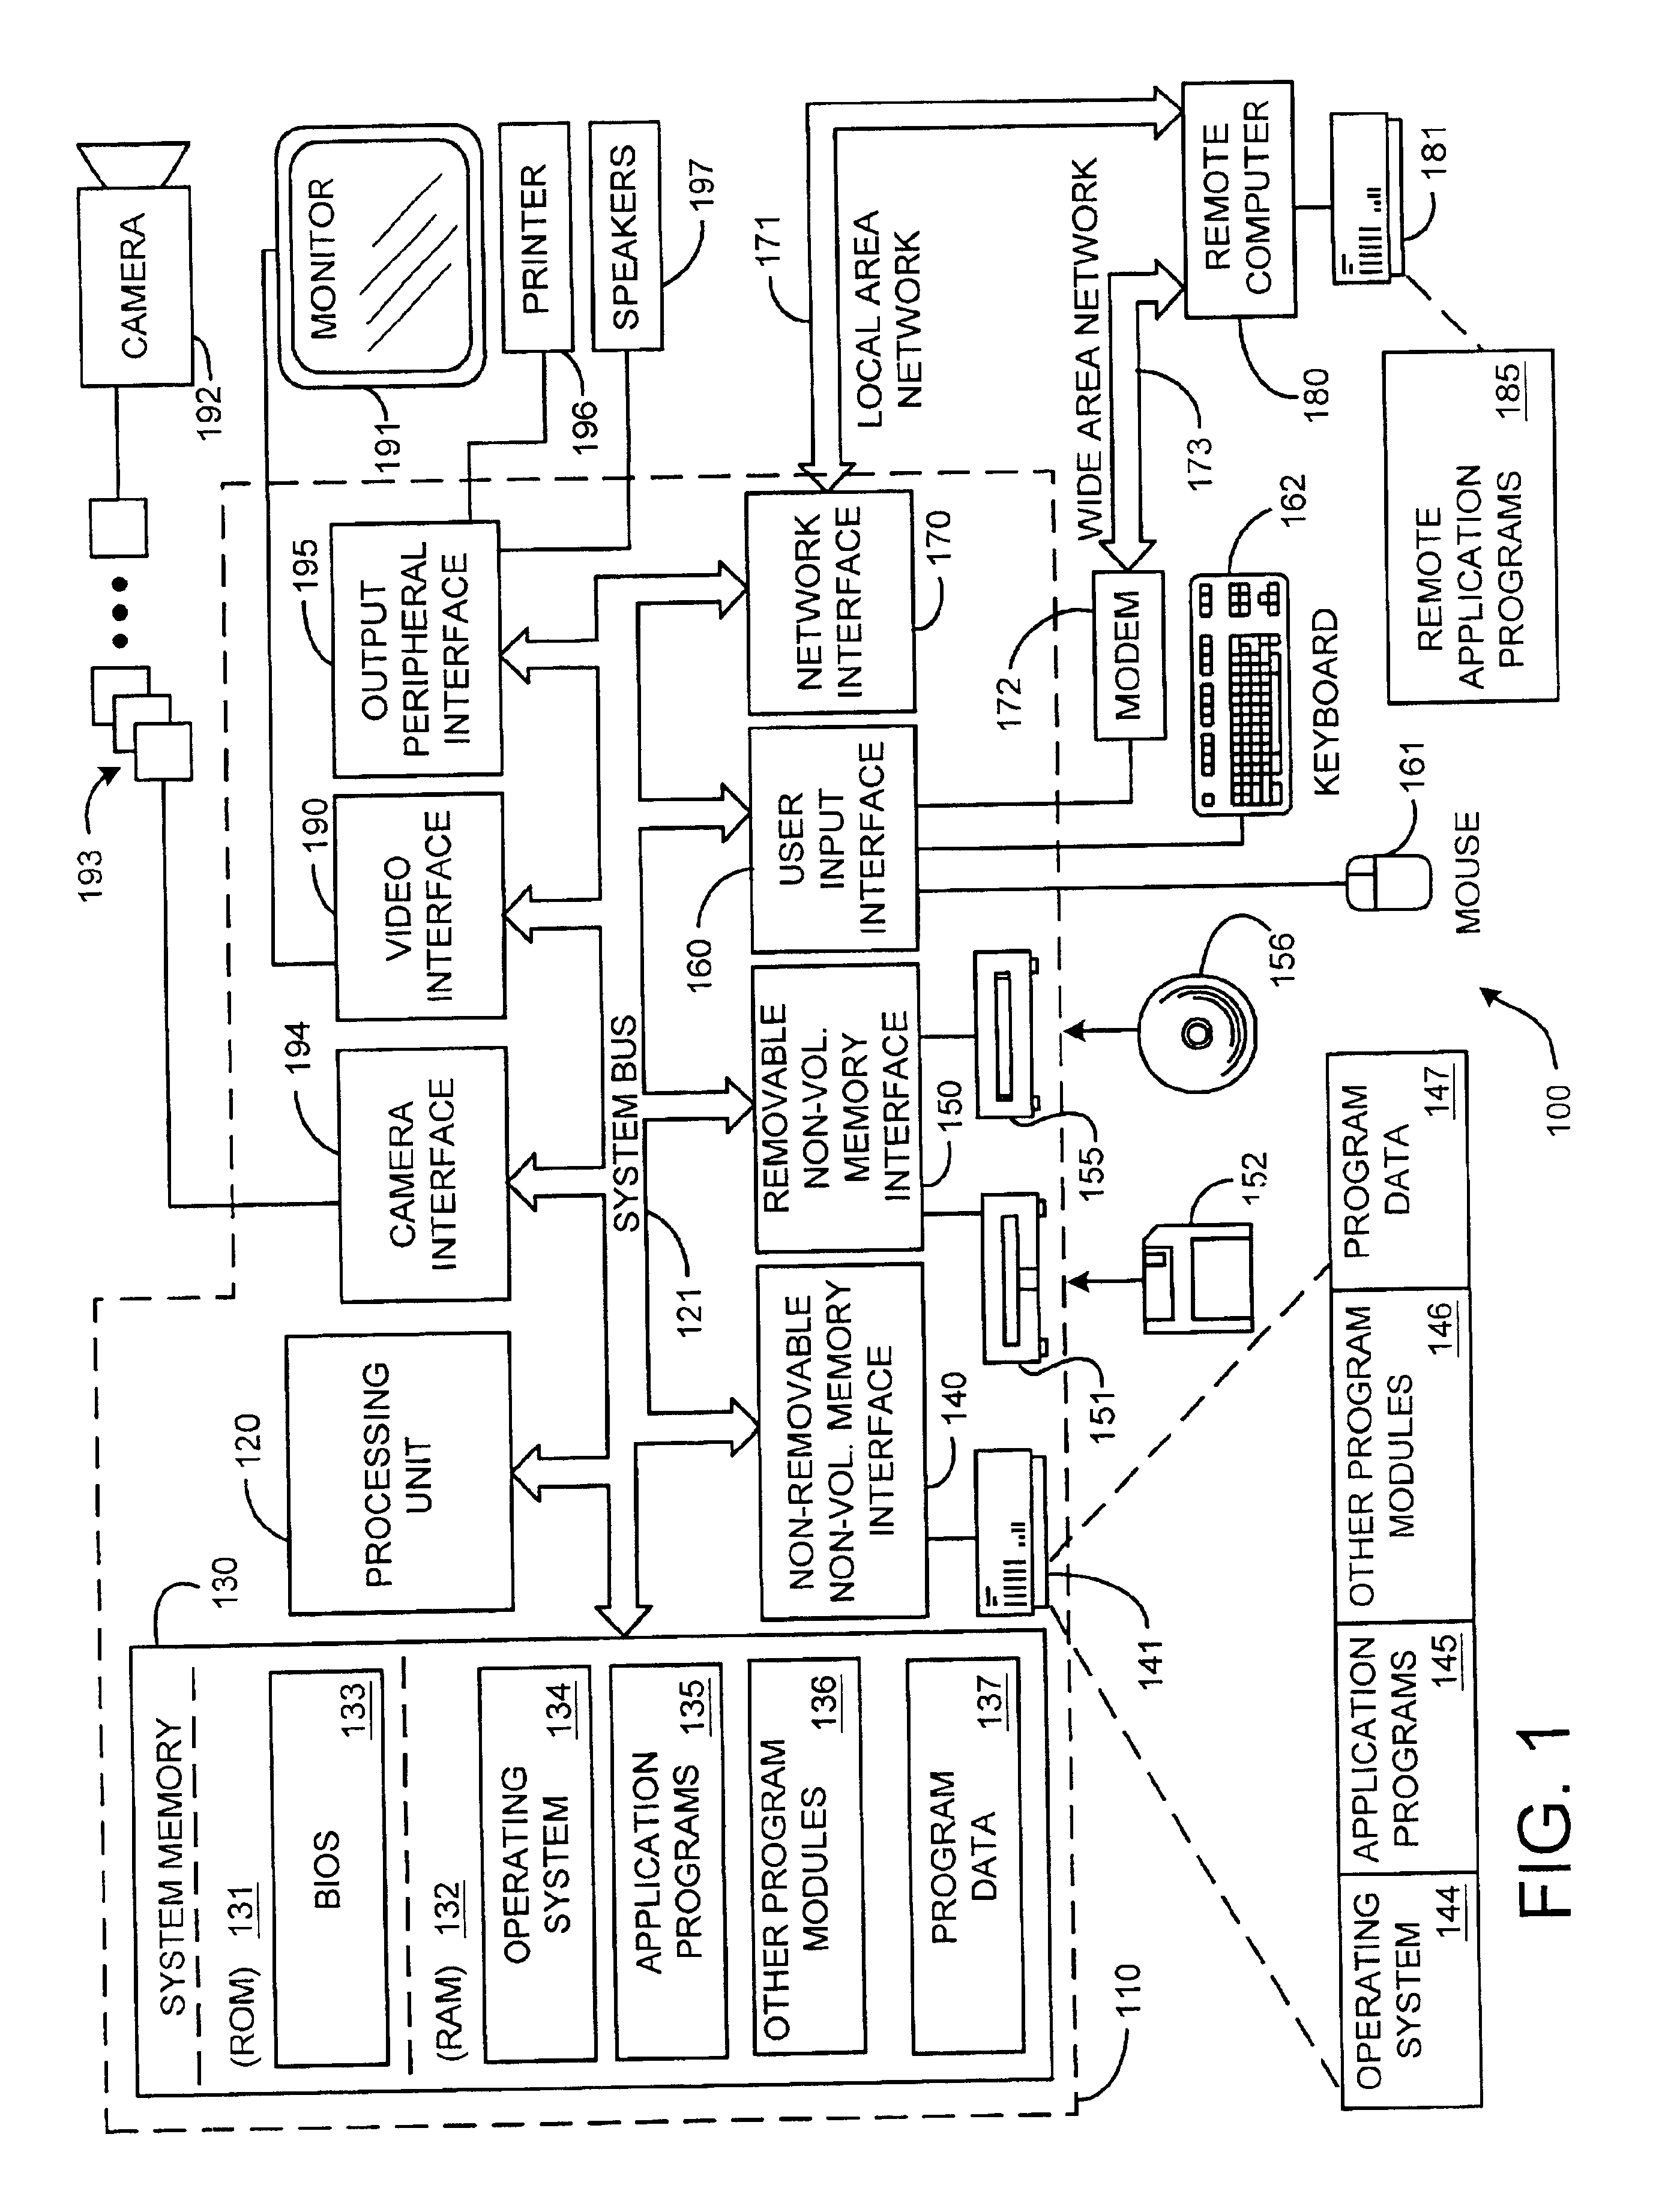 System and method for face recognition using synthesized training images